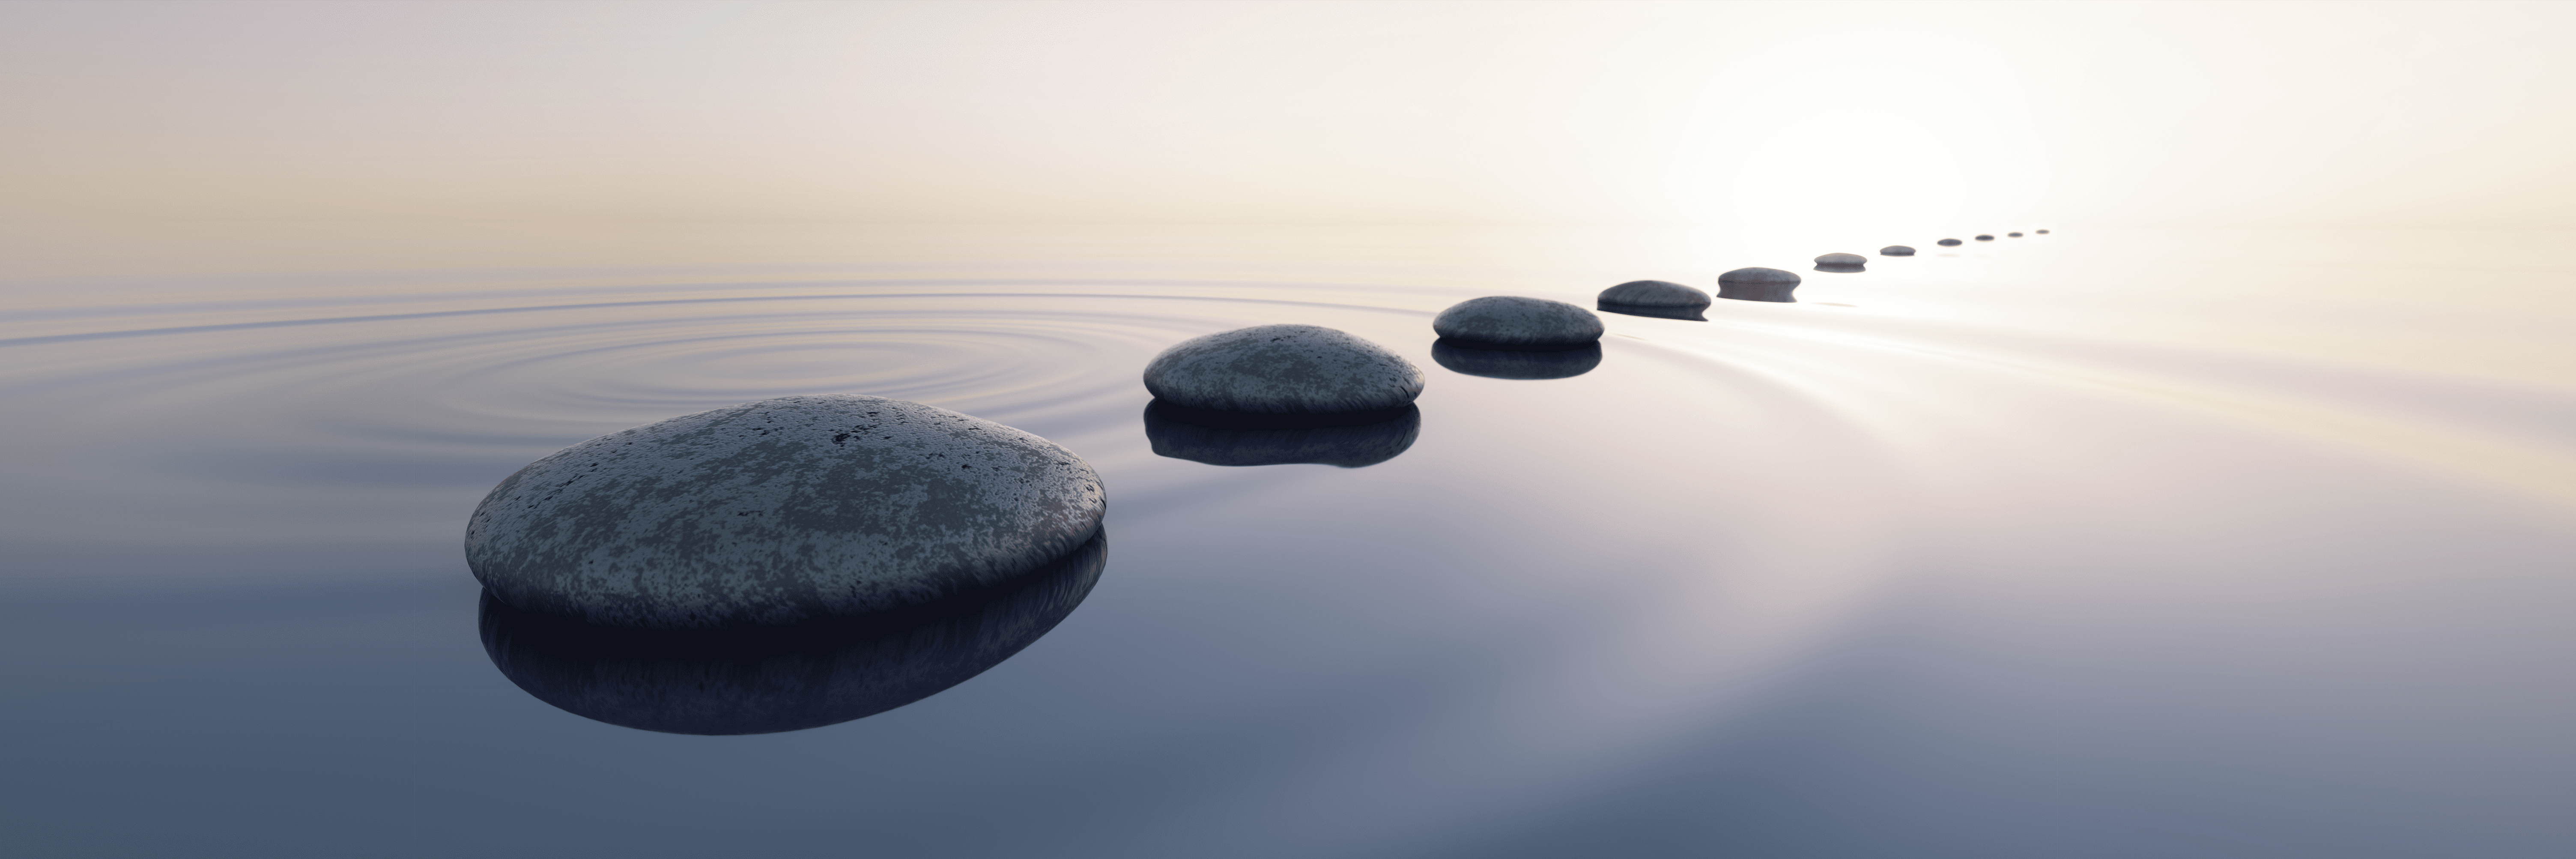 A calm and tranquil lake with large stones dissapearing onto the horizon